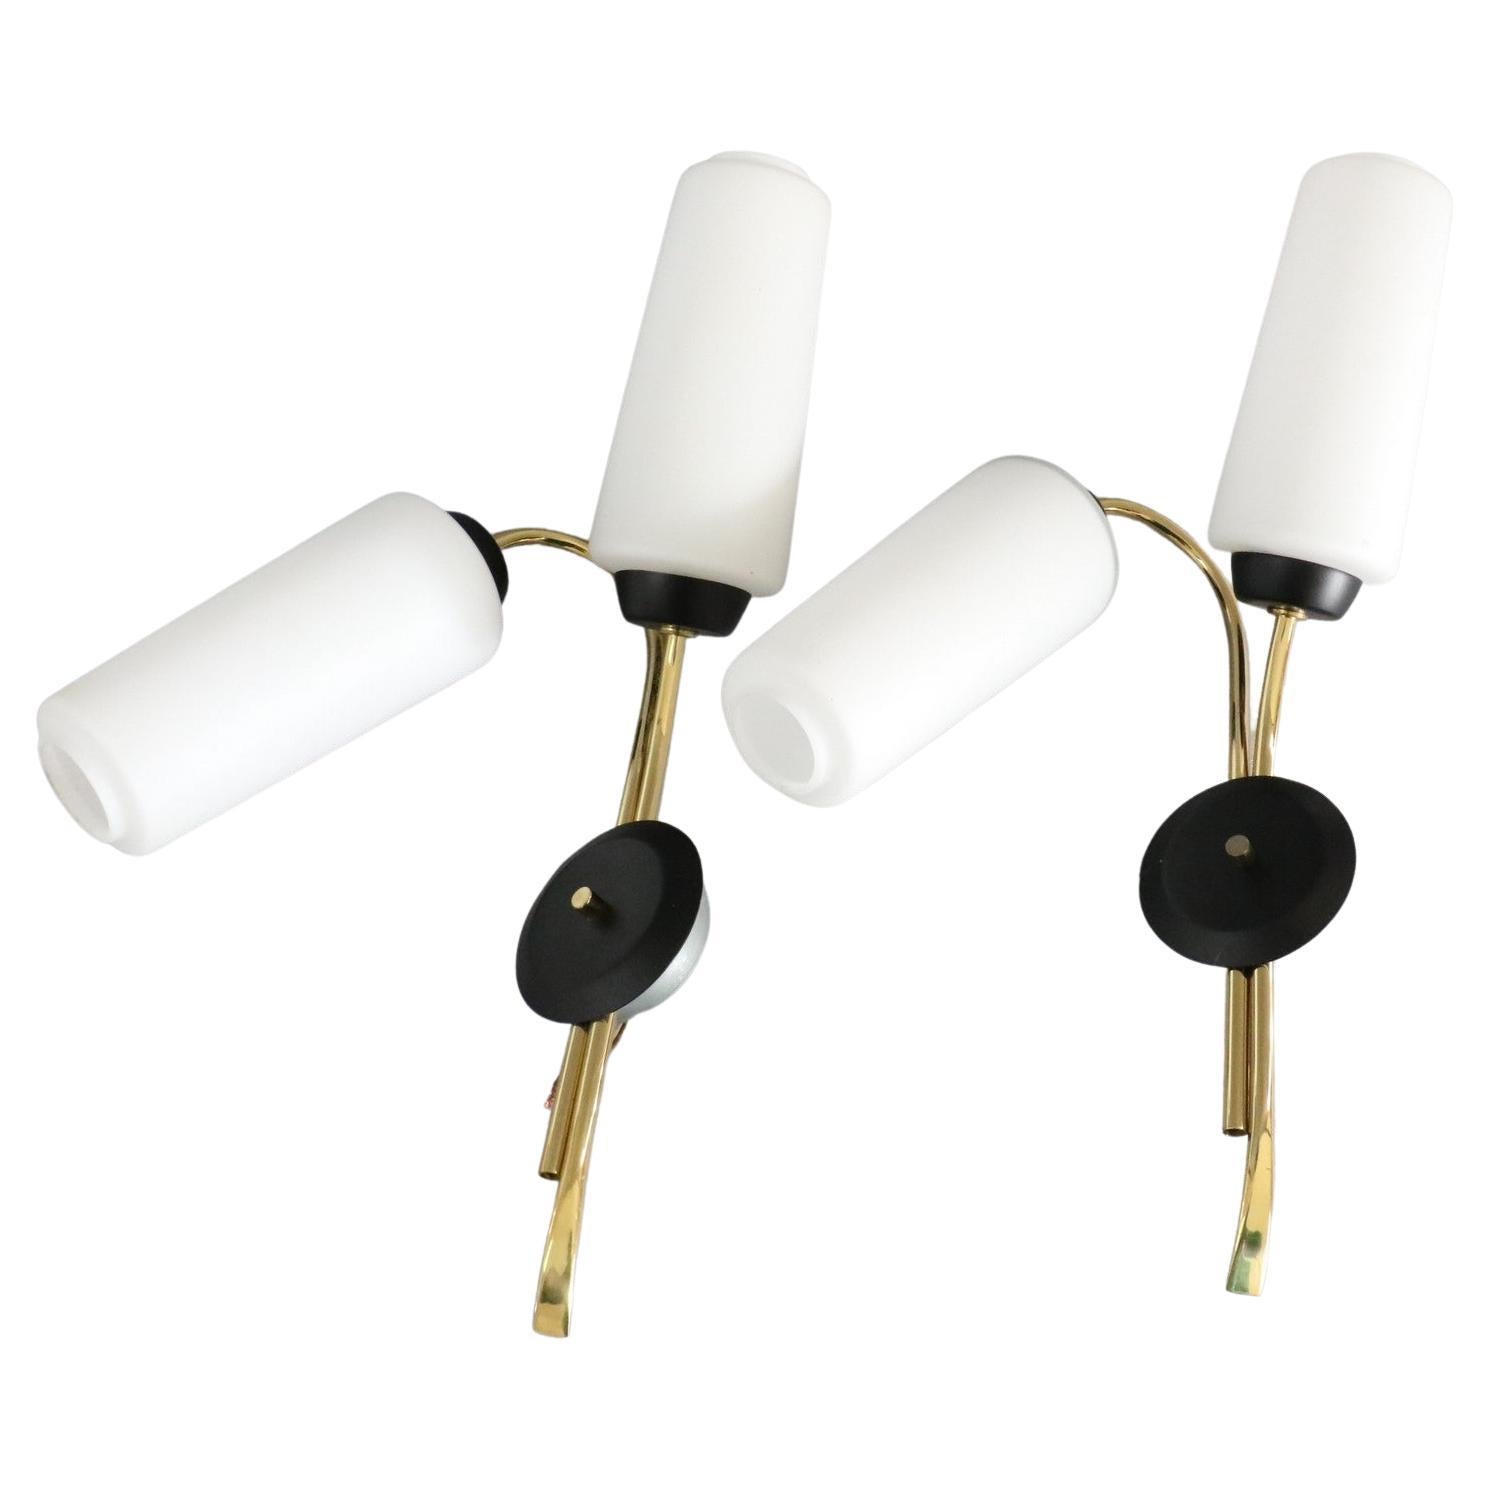 Maison Lunel, Pair of Mid-Century Modern Wall lights, 1950s France

Very nice pair of sconces with a 1950s design. 
They are very contrasted: the luminous and milky white of the opaline is opposed to the dark base of the blackened brass, the